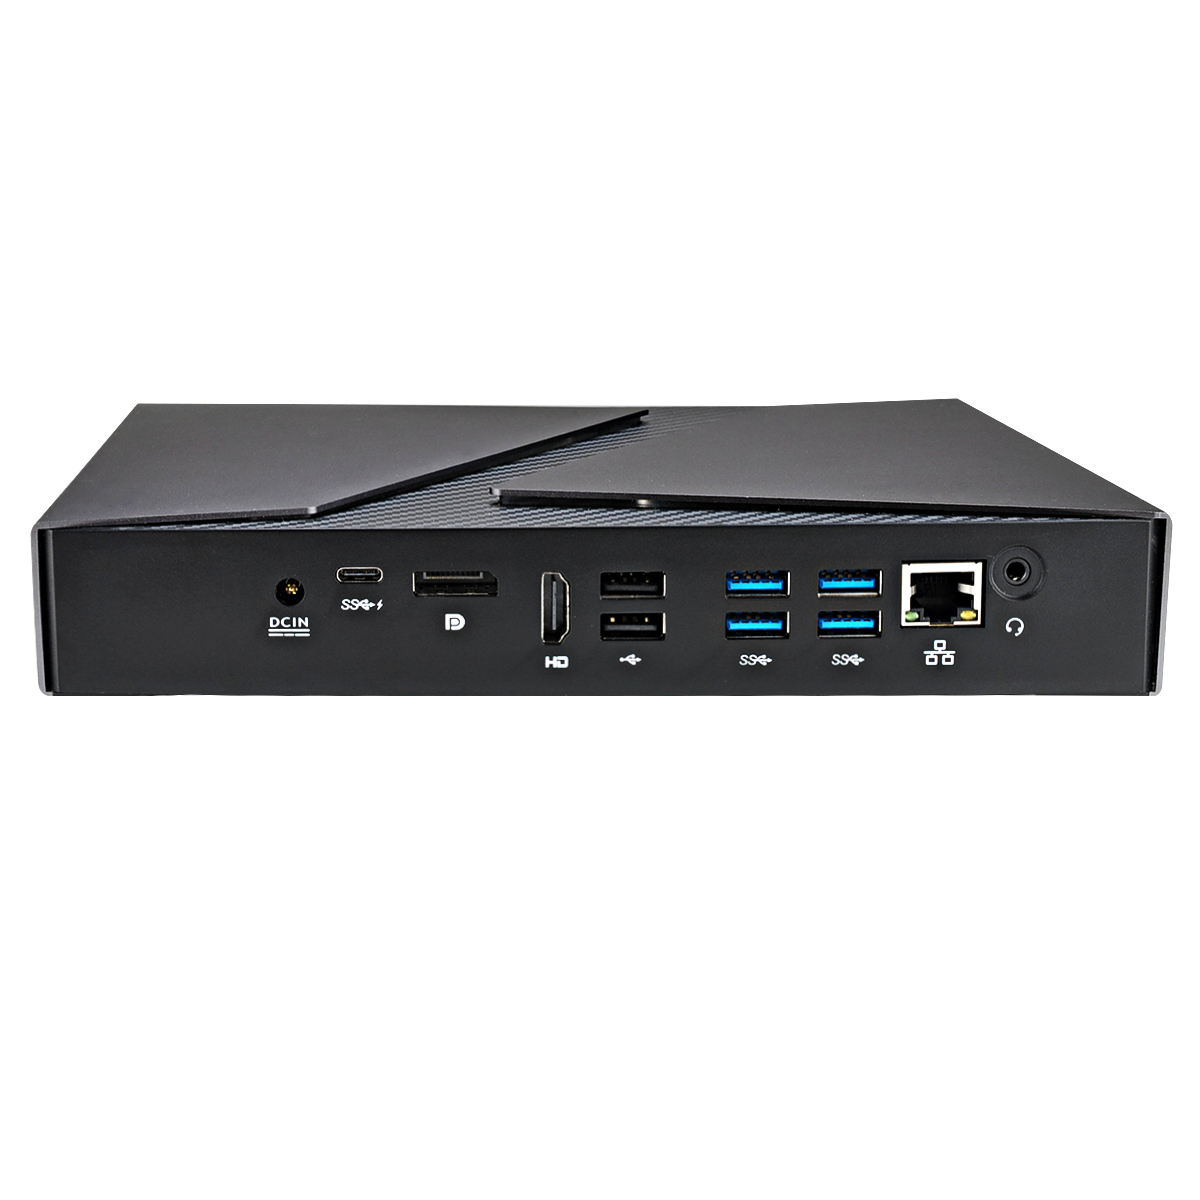 Find NVISEN Y-GX01 Mini PC Intel Core I7-9750H 16GB DDR4 512GB SSD Gaming PC Quad Core 2.4GHz to 4.1GHz NVIDIA GTX 1650 DDR4*2 Slot M.2 2280 SSD 2.5inch SATA HDMI DP Type C for Sale on Gipsybee.com with cryptocurrencies